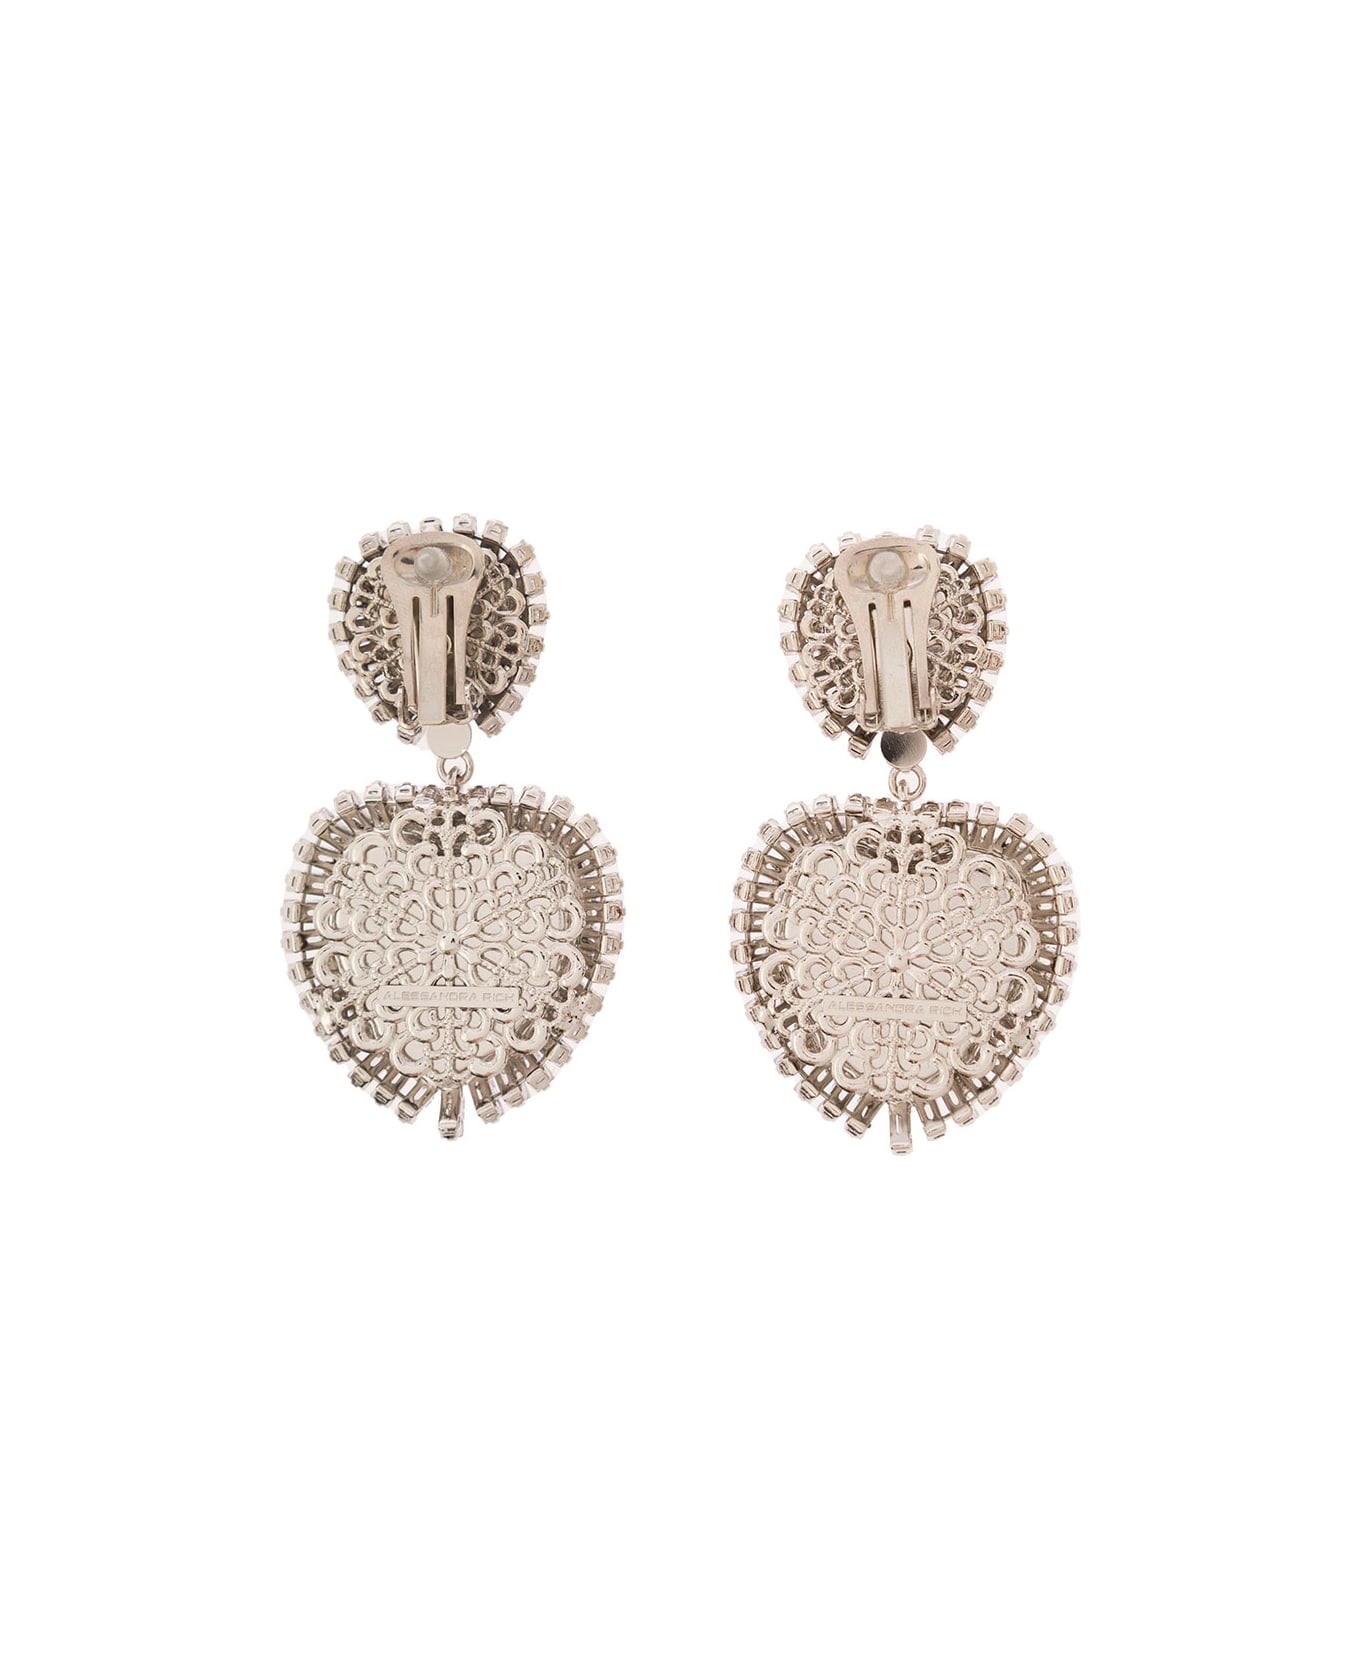 Alessandra Rich Silver-colored Heart-shaped Clip-on Earrings With Crystal Embellishment In Hypoallergenic Brass Woman - Metallic